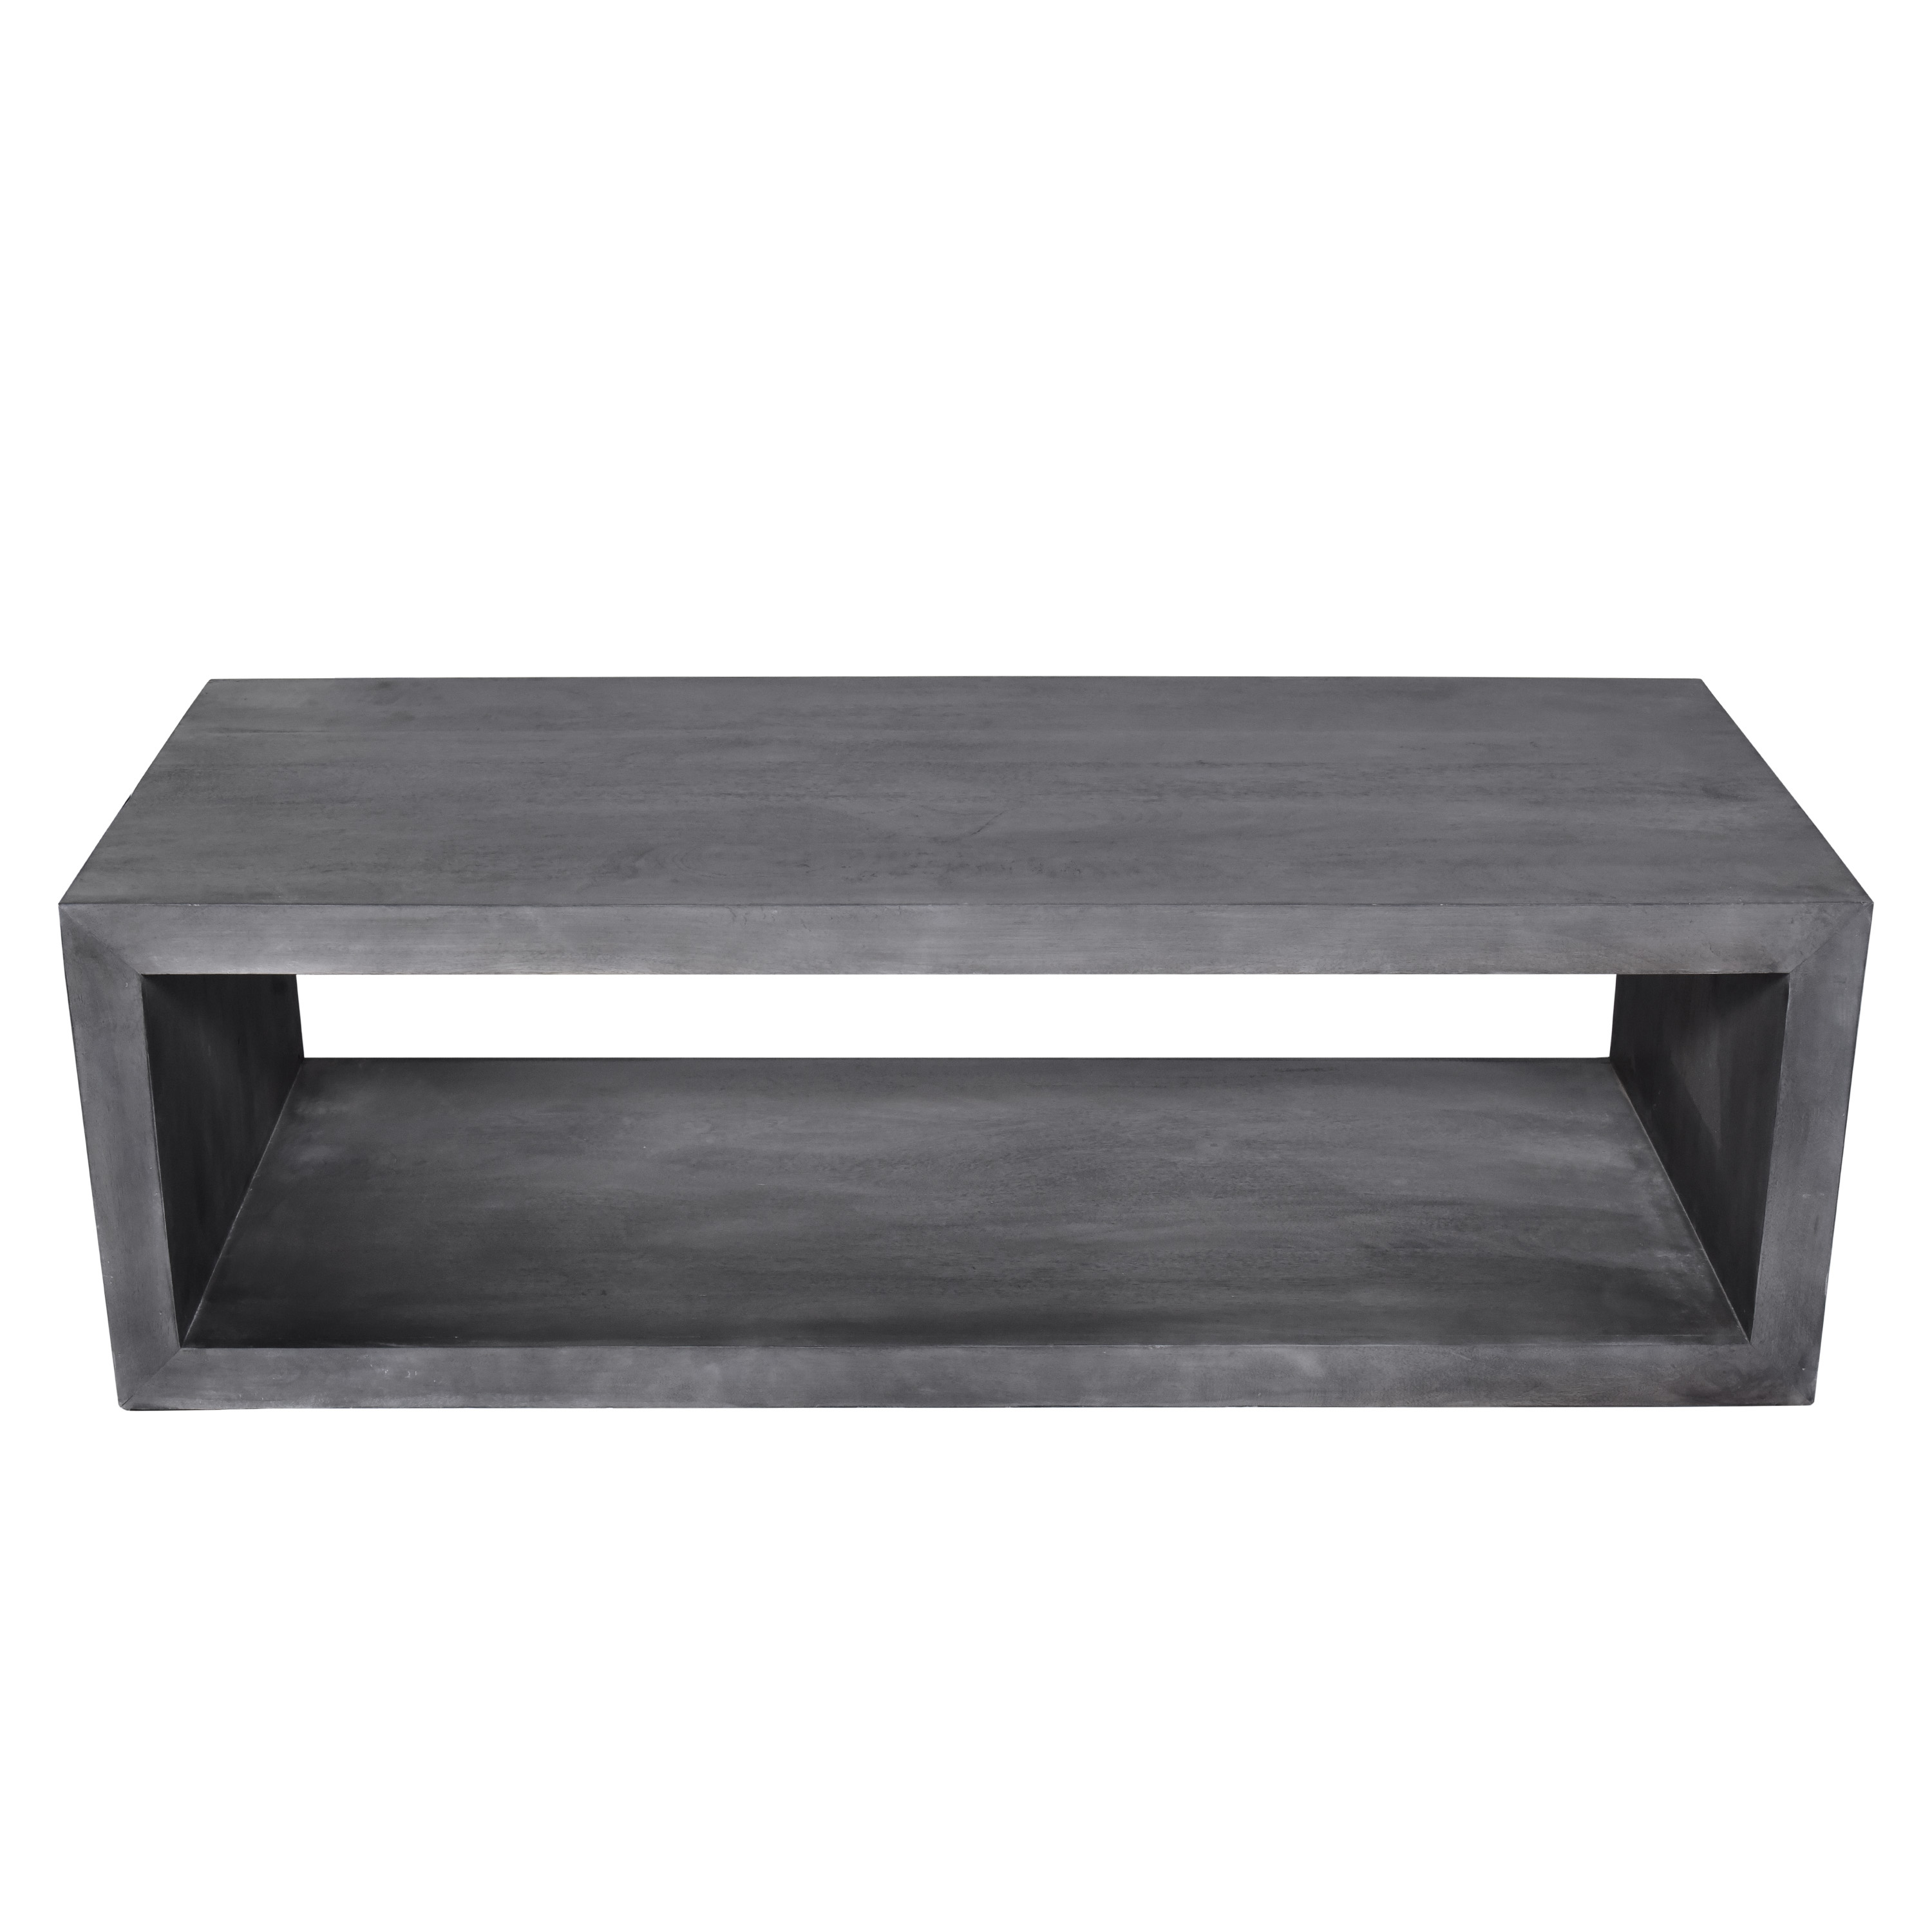 58" Cube Shape Wooden Coffee Table with Open Bottom Shelf, Charcoal Gray